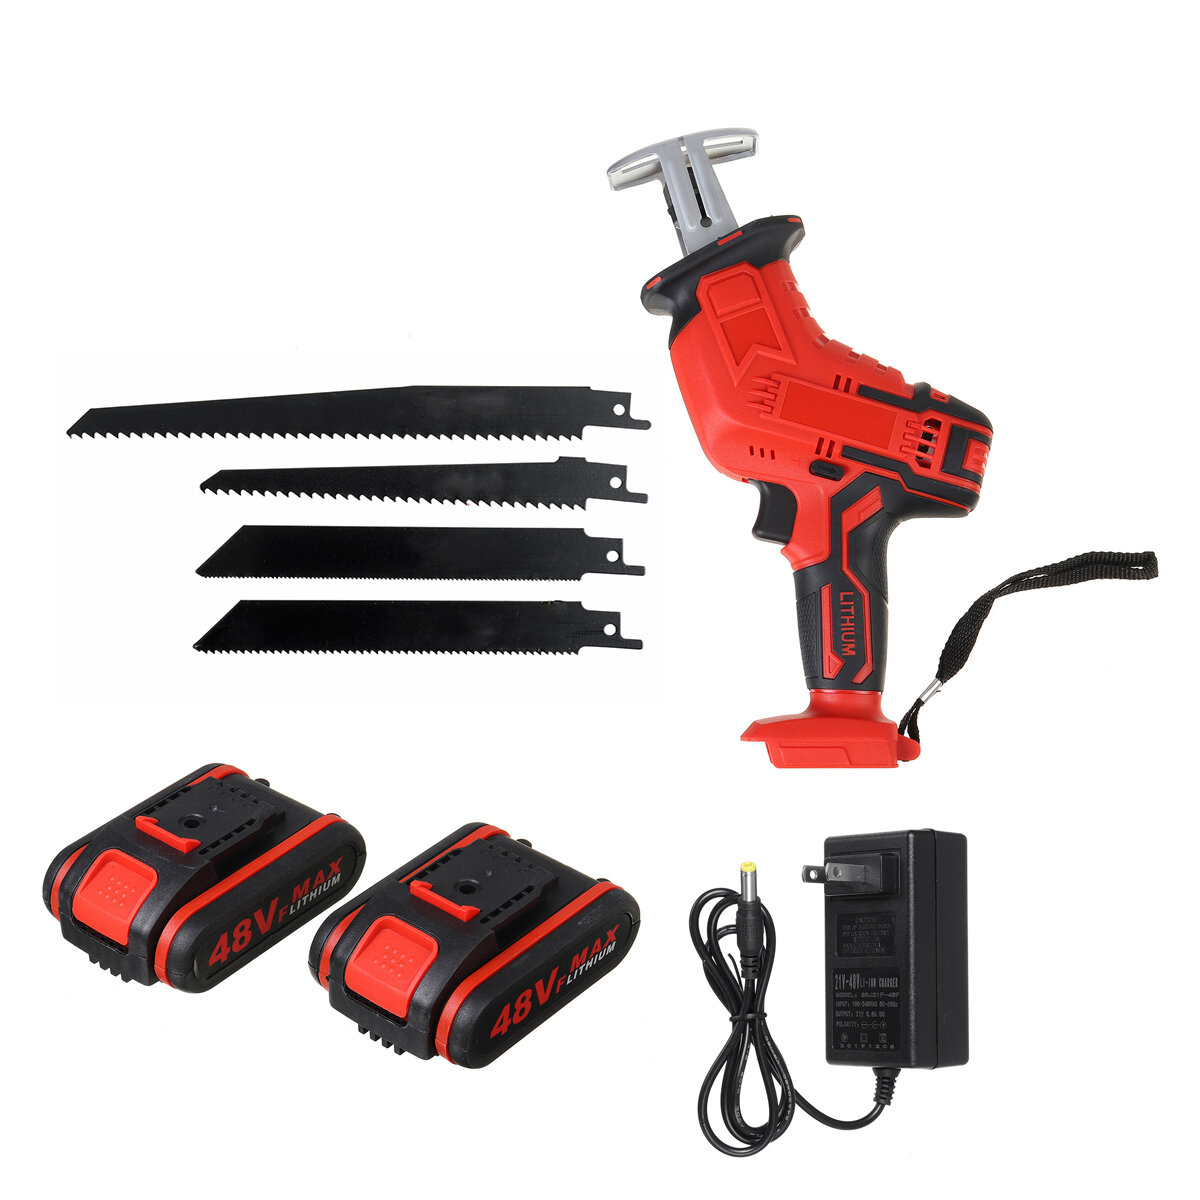 

21V Cordless Reciprocating Saw Electric Saw W/ 4 Saw Blades Metal Cutting Woodworking W/ 1/2 Lithium Battery